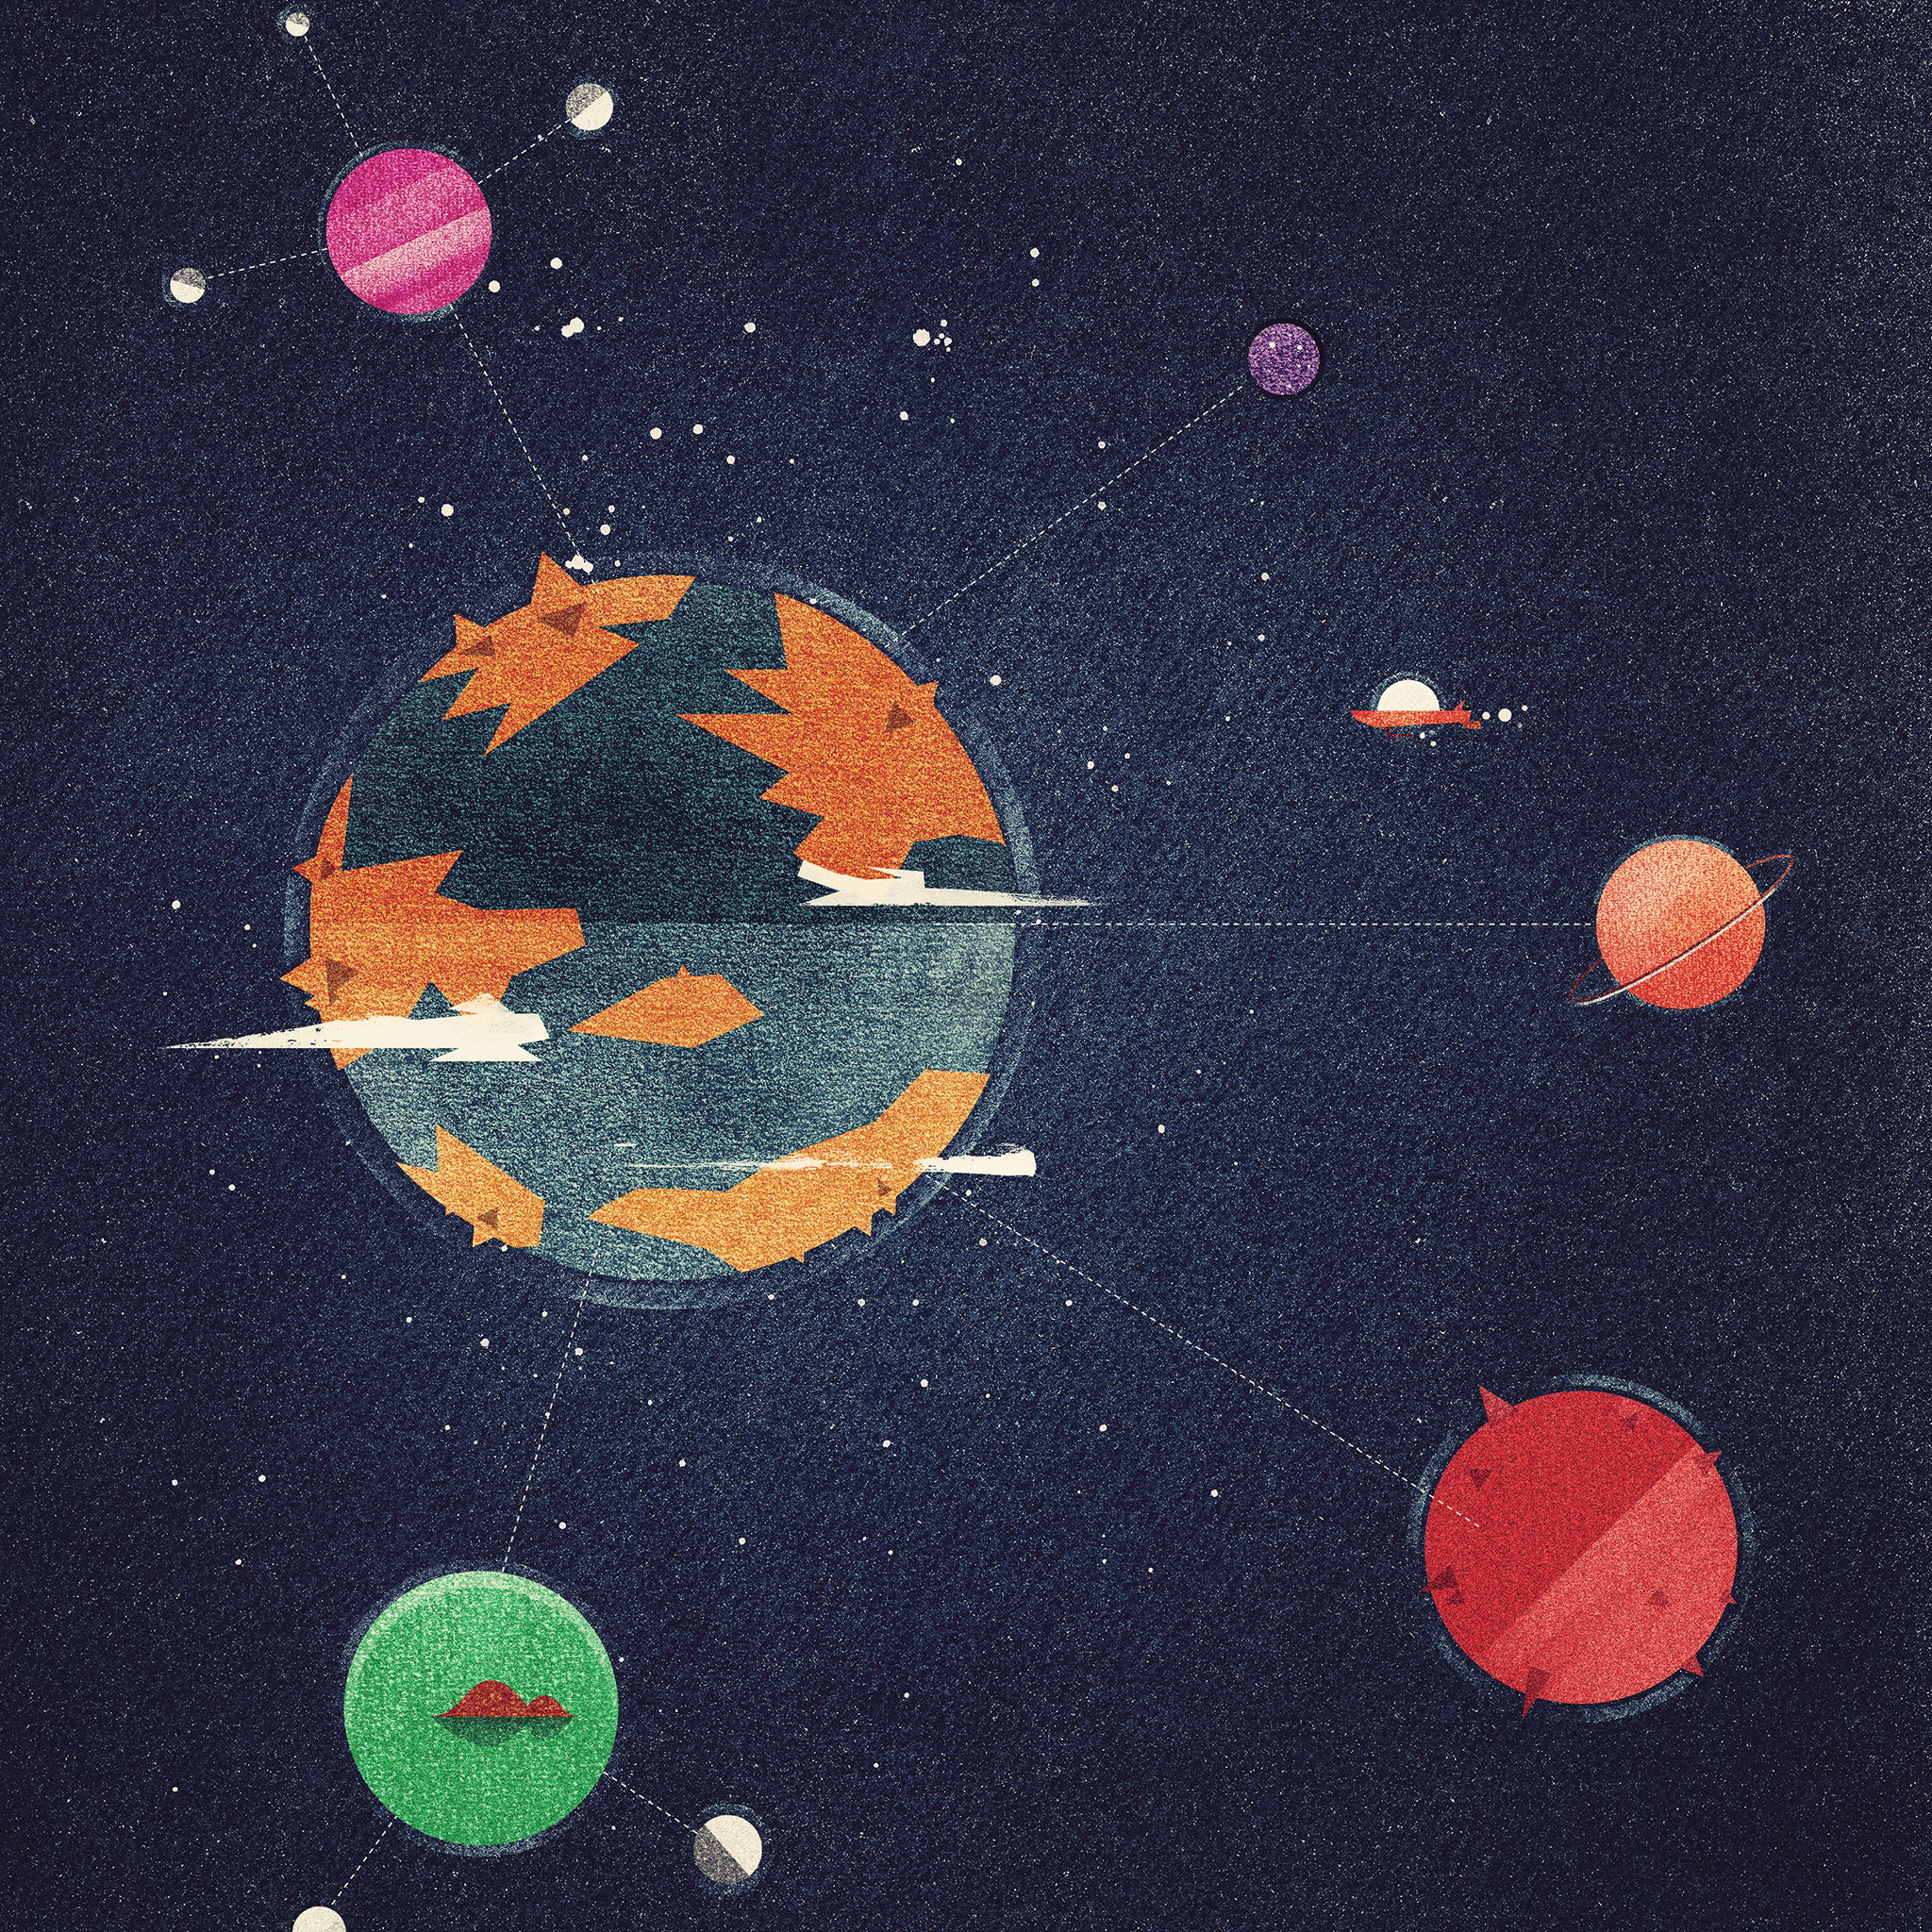 [full-res Version] - Retro Solar System Background , HD Wallpaper & Backgrounds